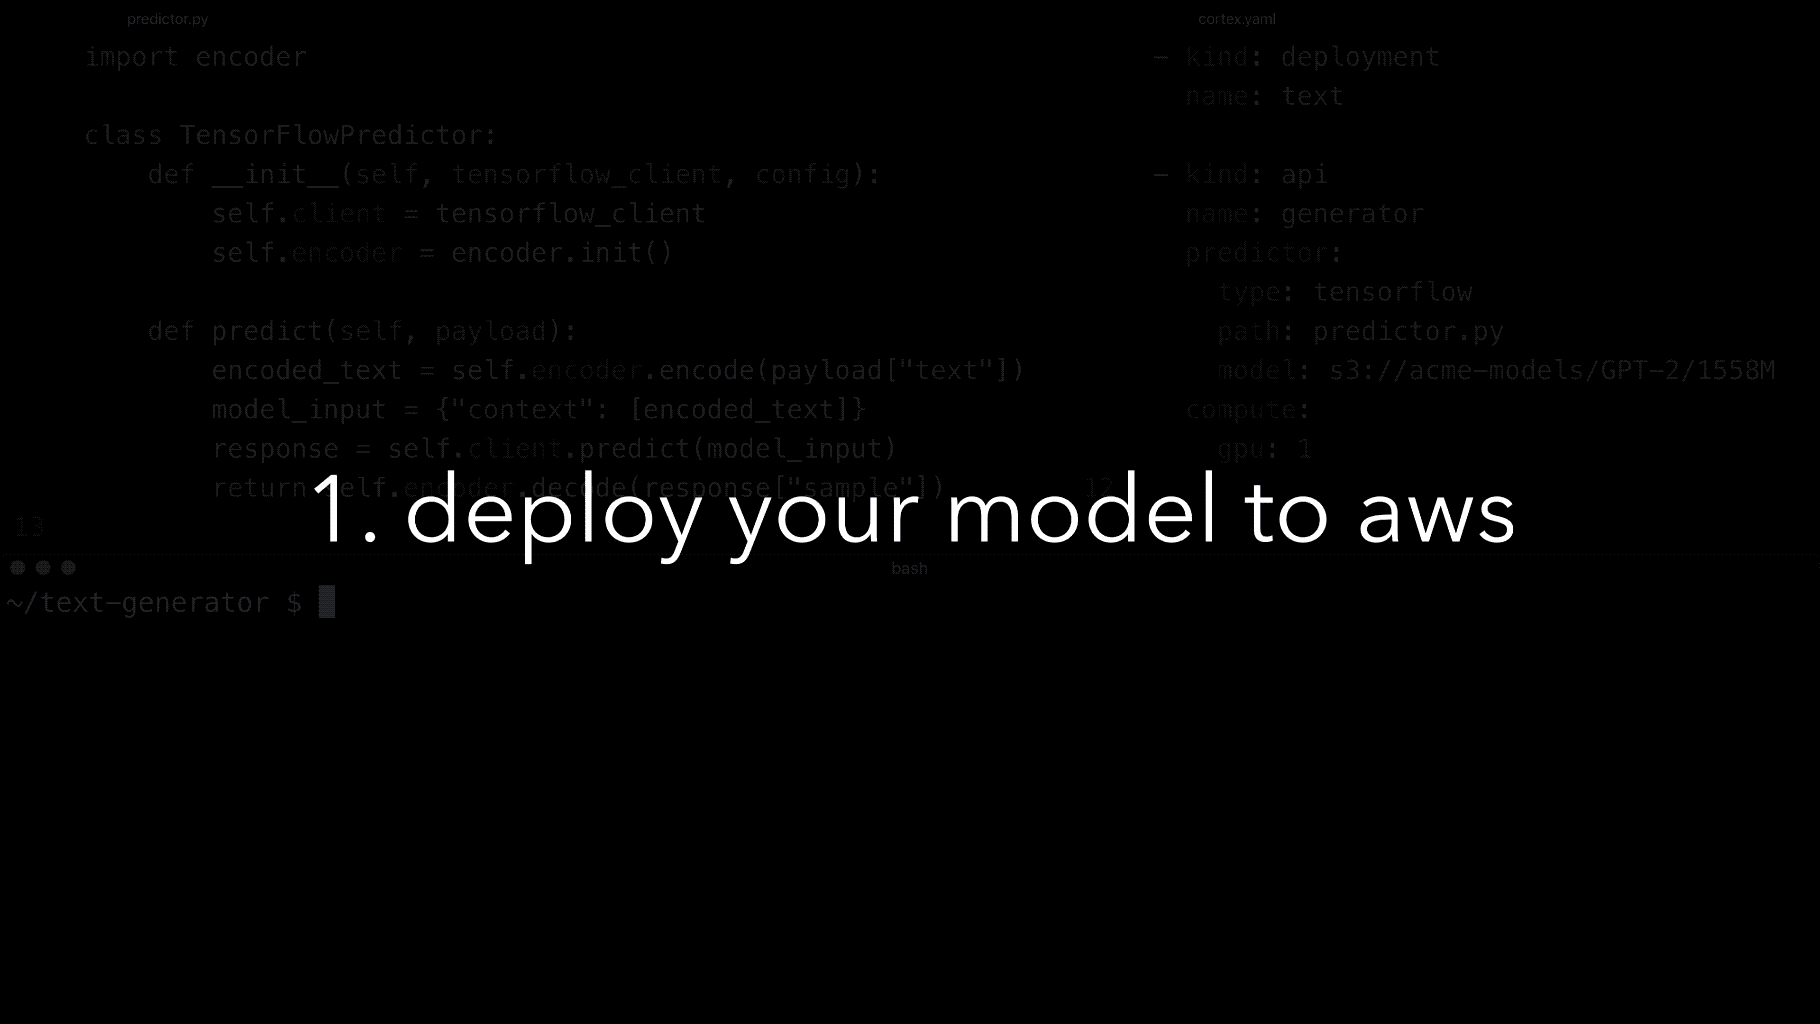 Deployment of machine learning models in production